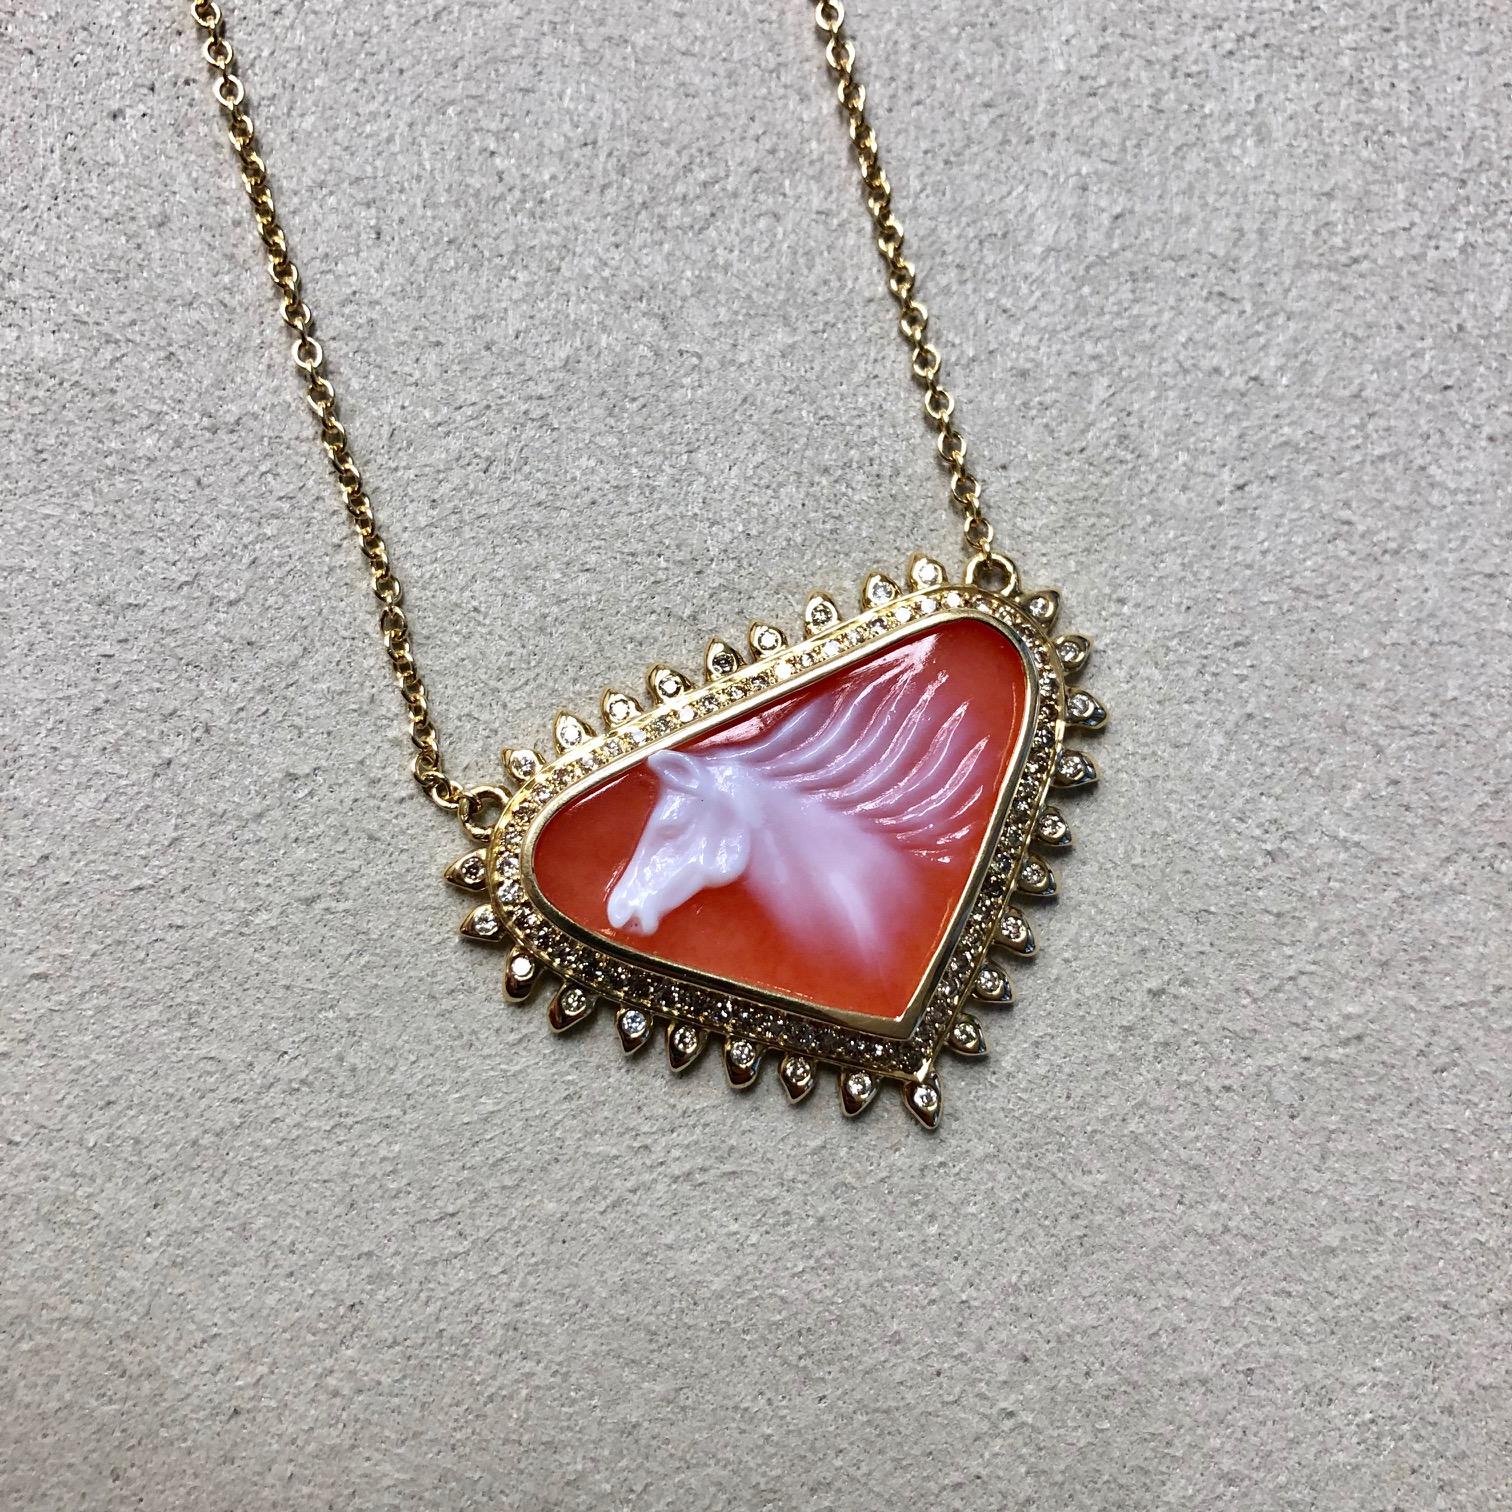 Created in 18 karat yellow gold 
Hand carved carnelian horse carving 14 cts approx
Carnelian is natural & has a gorgeous orange color
Champagne diamonds 0.50 cts approx
18kyg 17.5 inch cable chain with 18kyg lobster lock
One of a kind


About the